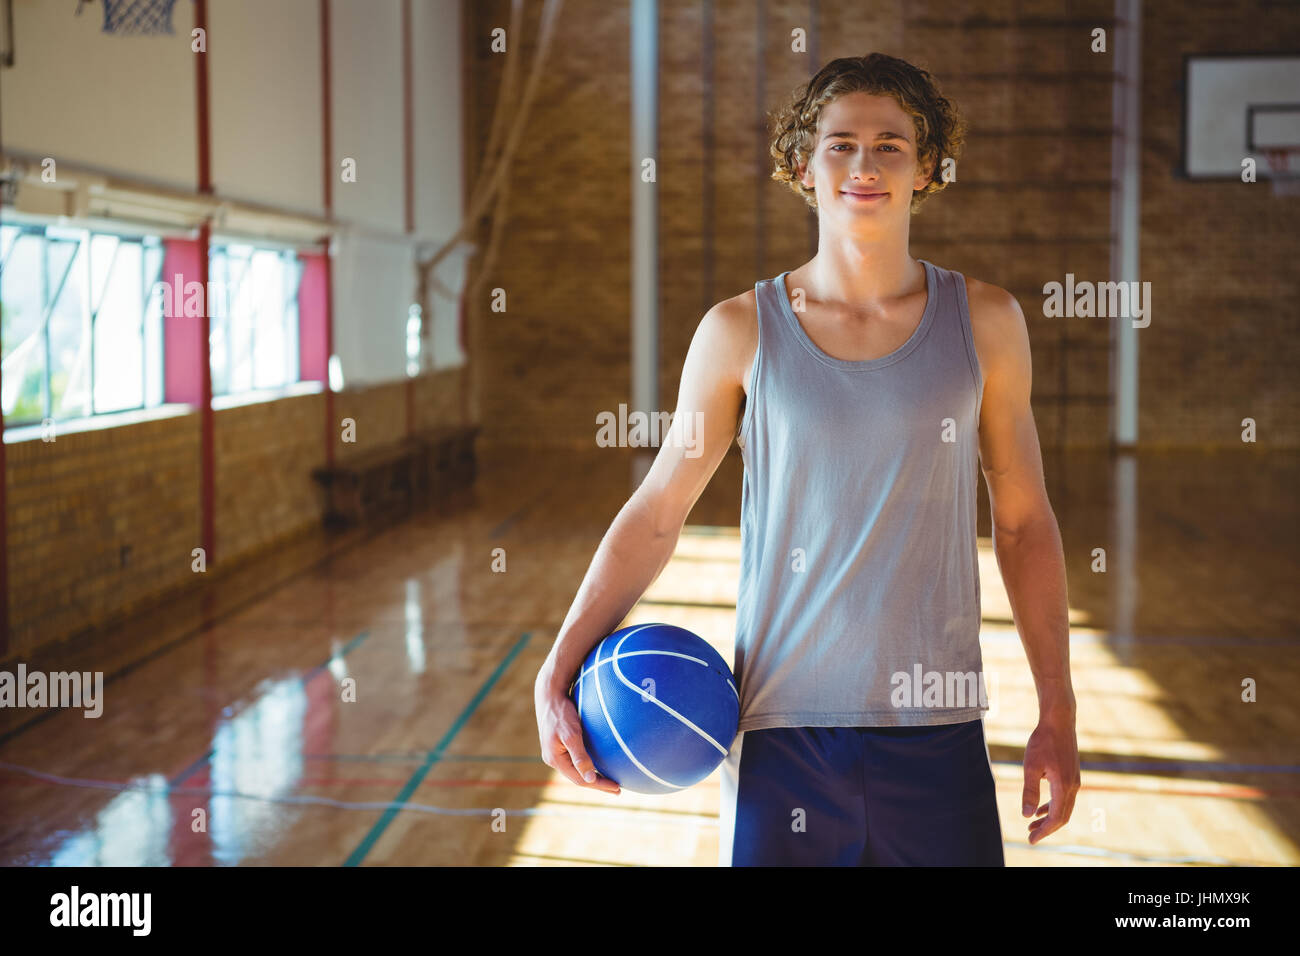 Portrait of smiling young man with basketball standing on hardwood floor in court Stock Photo